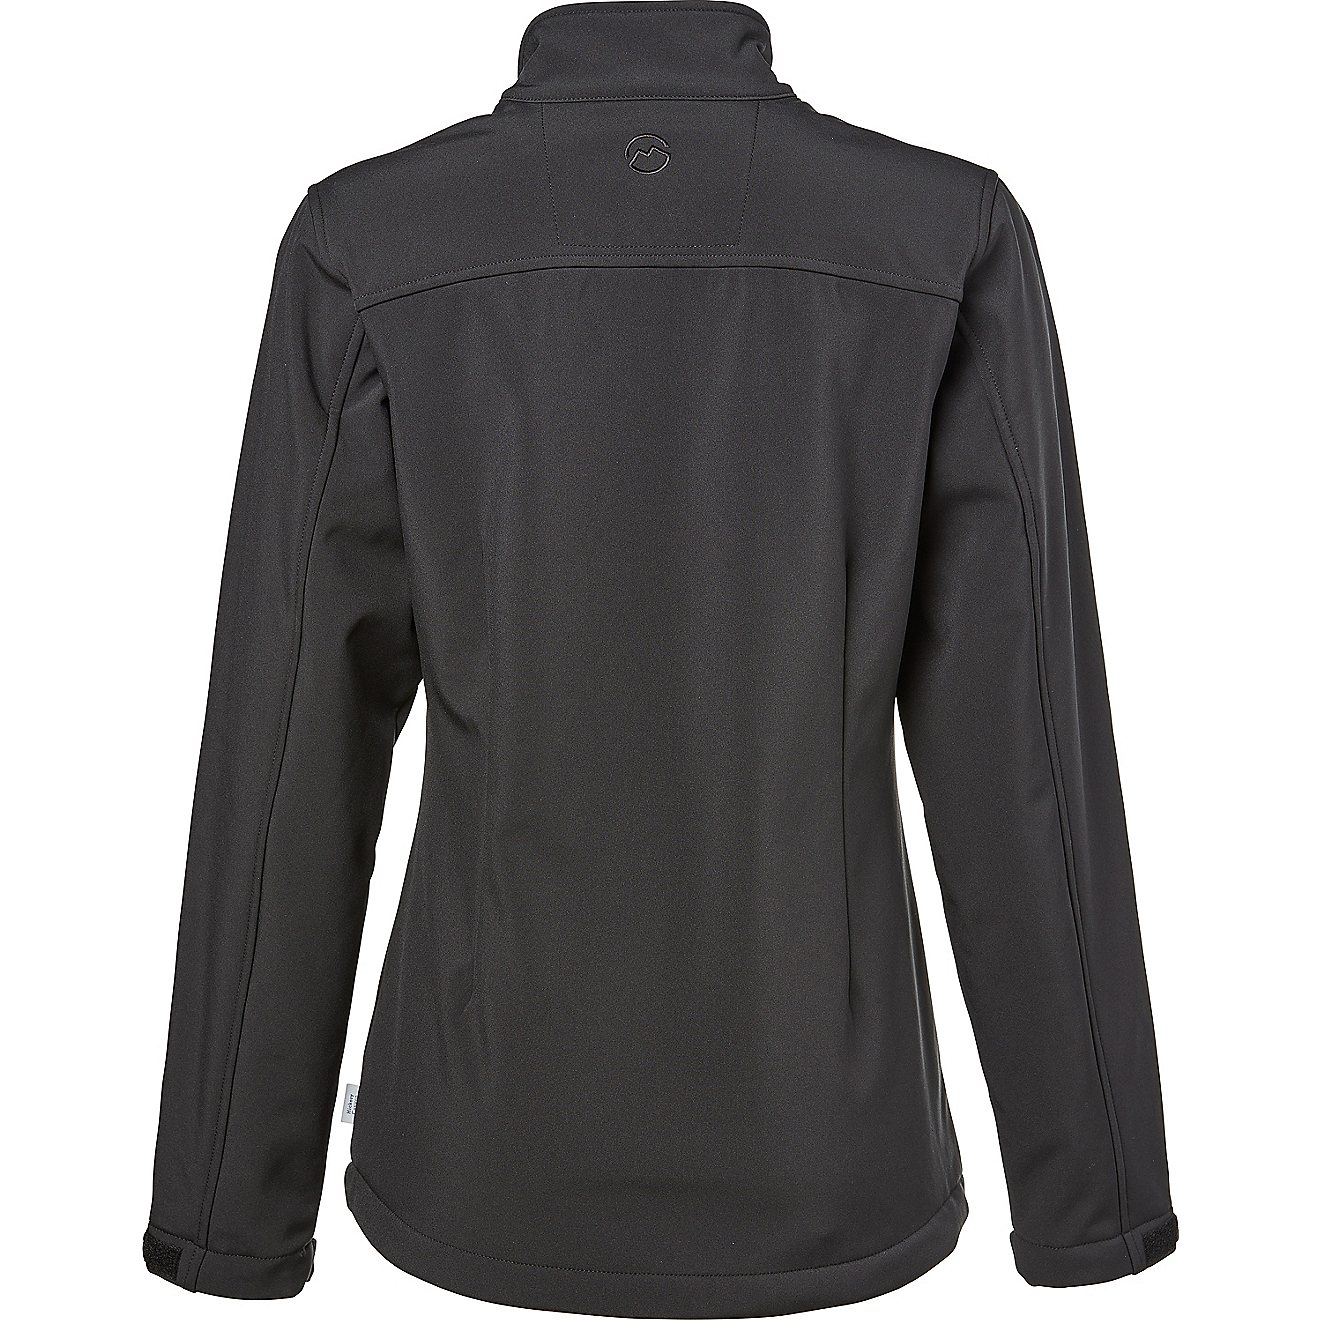 Magellan Outdoors Women's Hickory Canyon Softshell Jacket                                                                        - view number 2